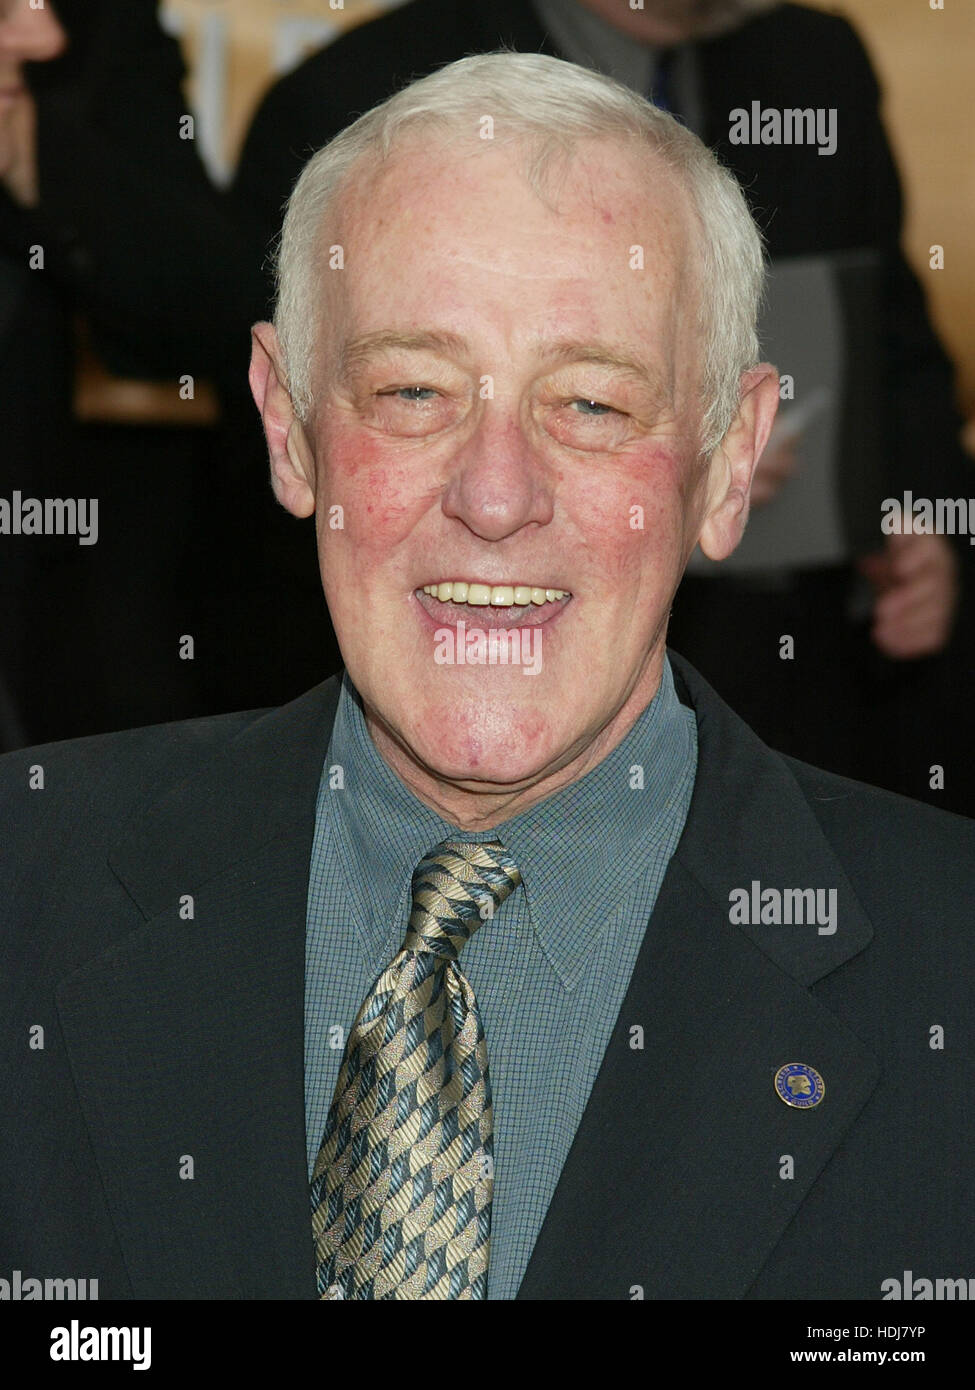 John Mahoney  arrives at the Screen Actors Guild Awards in Los Angeles, California on February 22, 2004.  Photo credit: Francis Specker Stock Photo